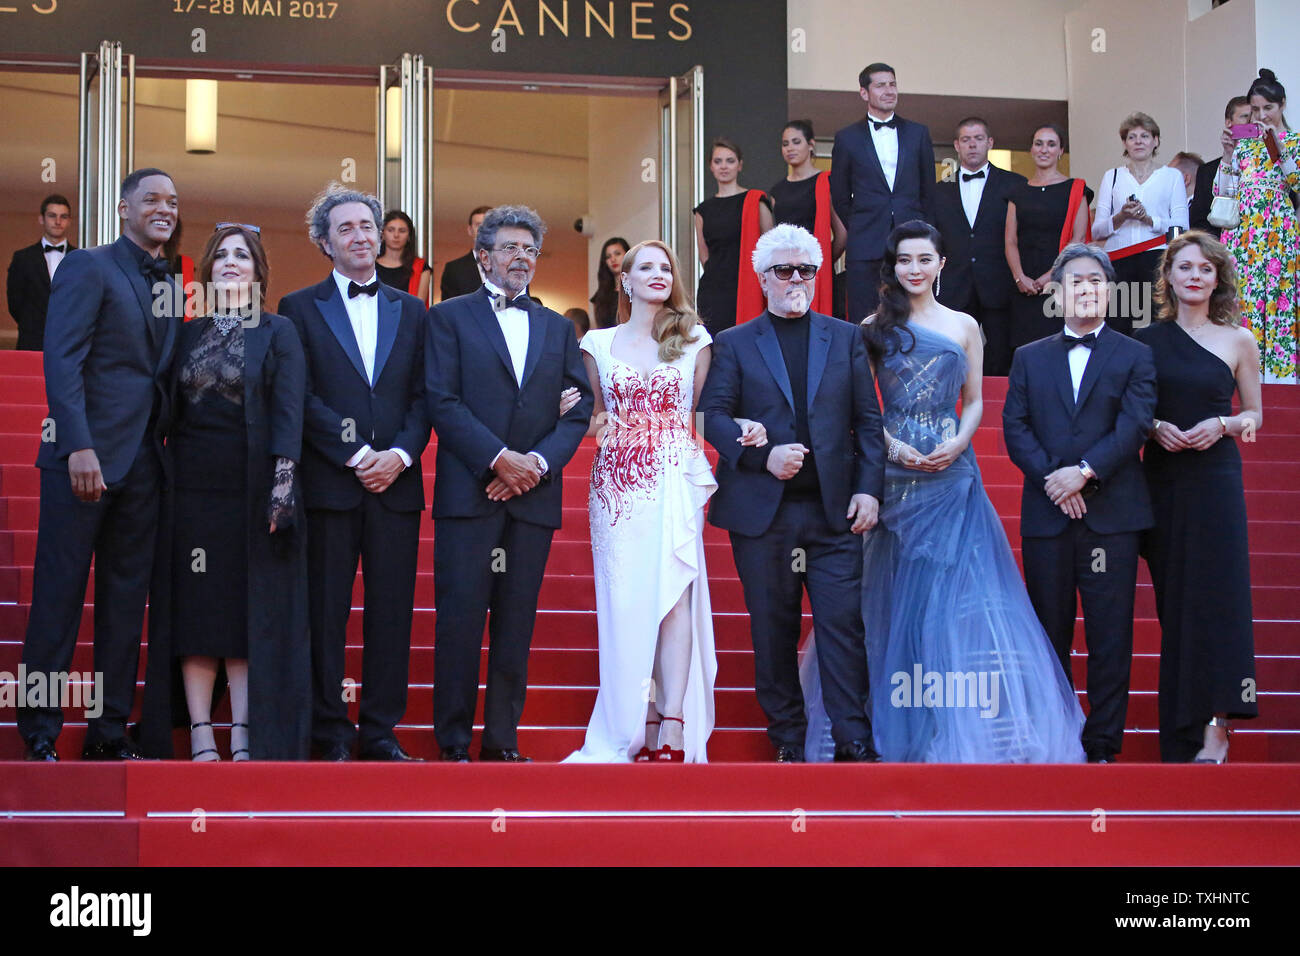 (From L to R) Jury members Will Smith, Agnes Jaoui, Paolo Sorrentino, Gabriel Yared, Jessica Chastain, President of the jury Pedro Almodovar, mayor of Cannes David Lisnard, Fan Bingbing, Park Chan-wook and Maren Ade arrive on the red carpet before the closing ceremony of the 70th annual Cannes International Film Festival in Cannes, France on May 28, 2017.  Photo by David Silpa/UPI Stock Photo